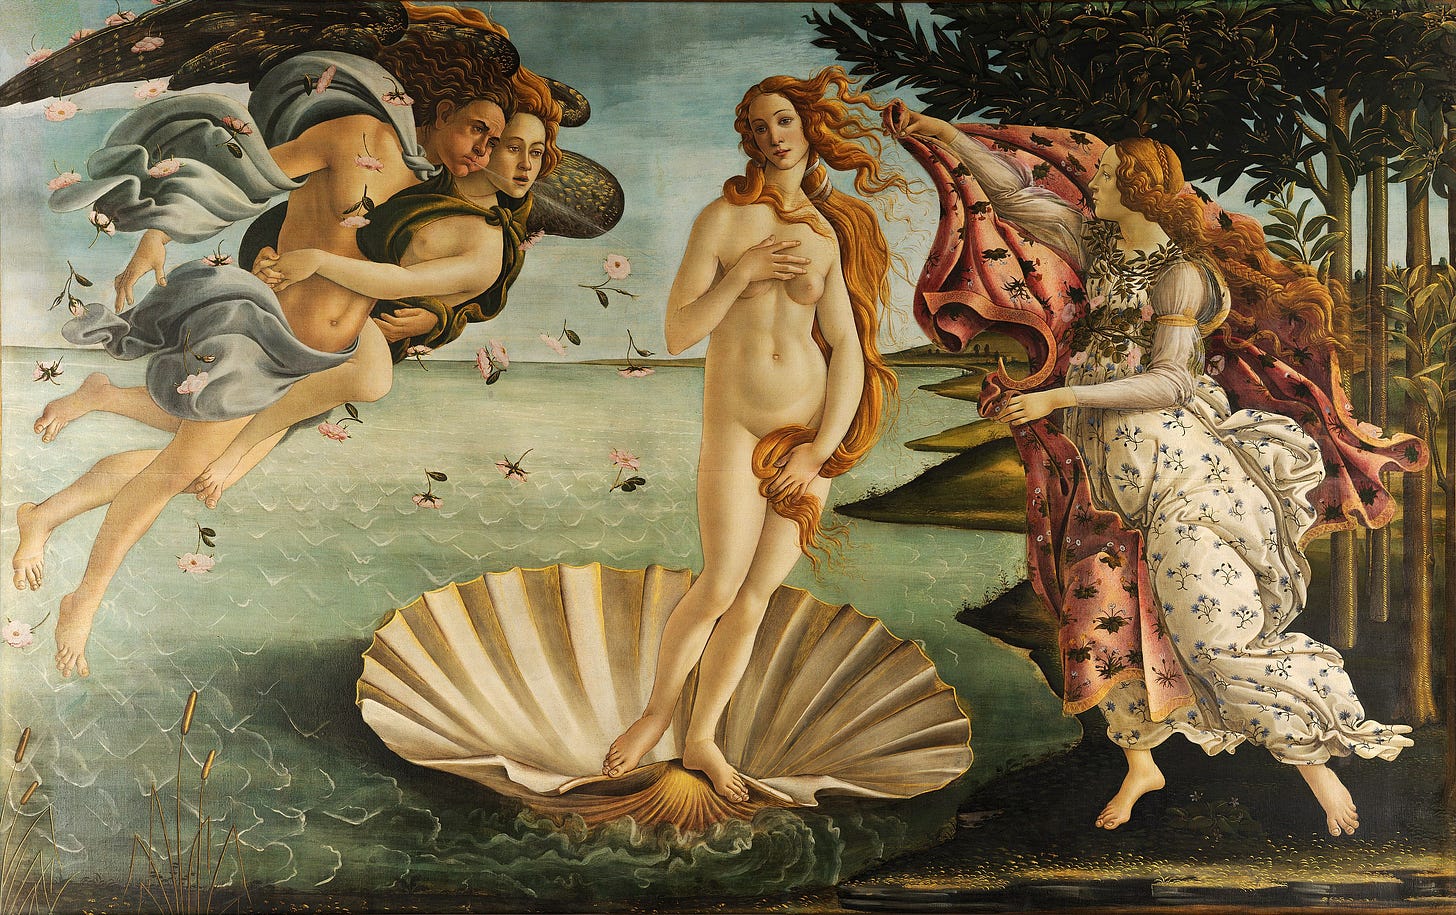 Venus emerges from the ocean on a clam shall as gods and goddesses herald her arrival